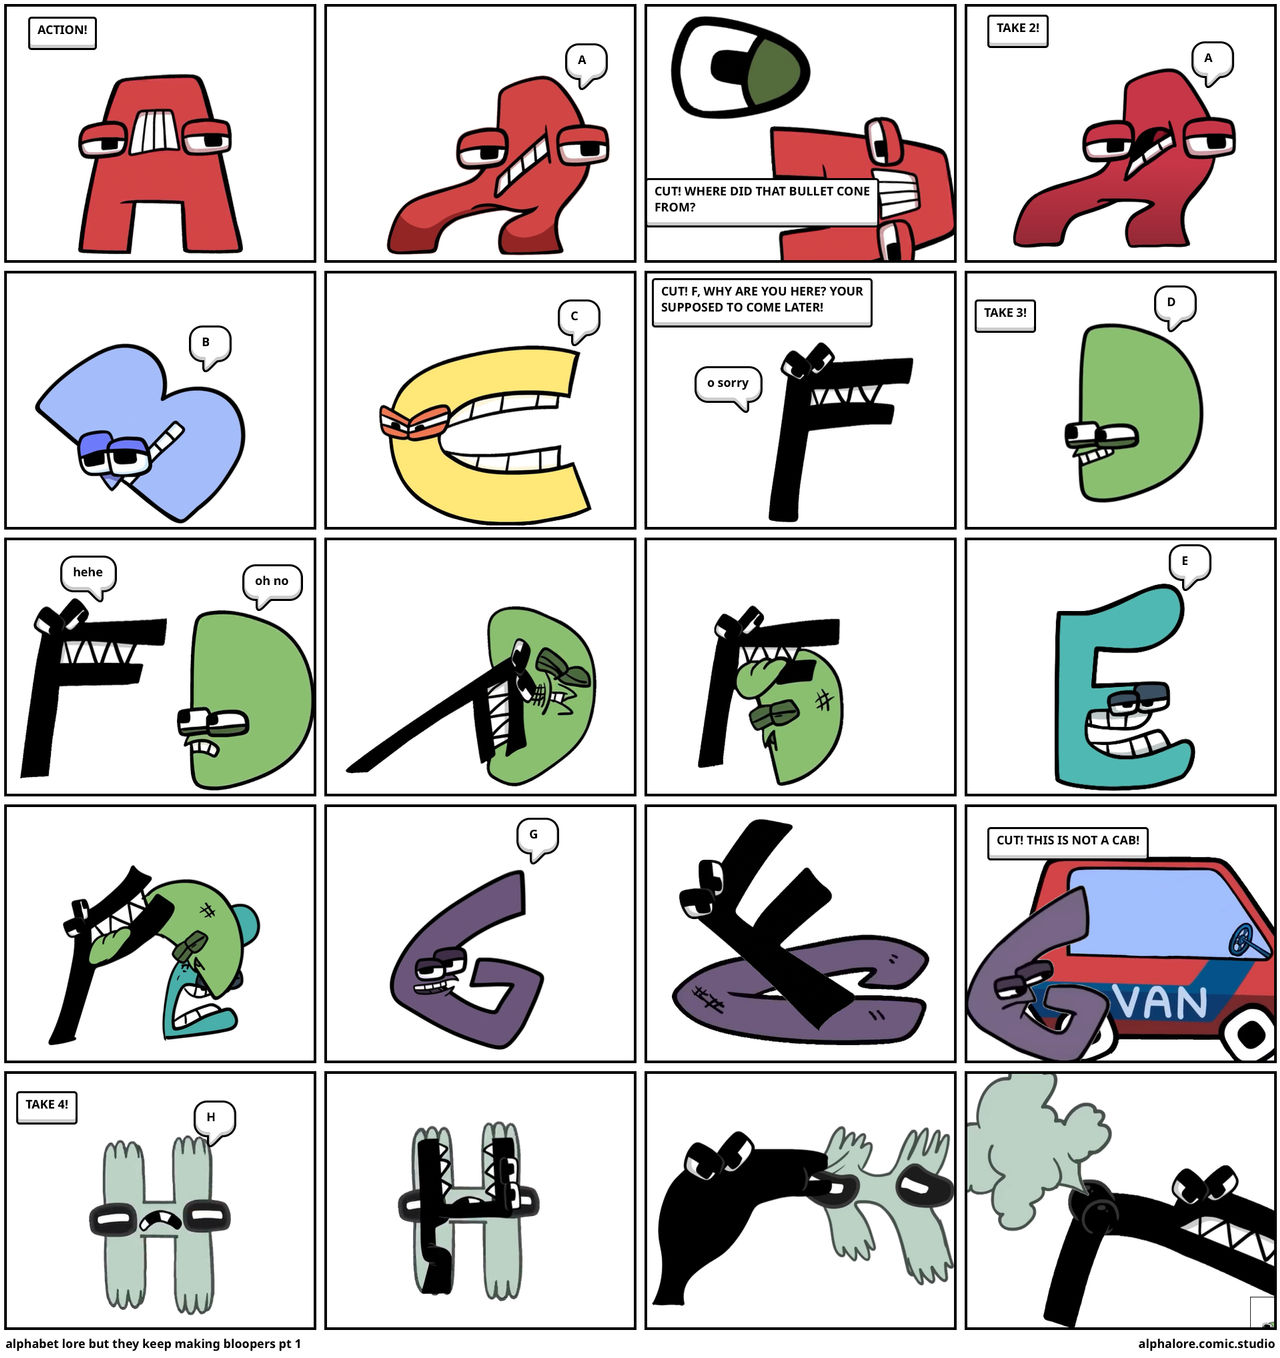 These alphabet lore comics are messed up